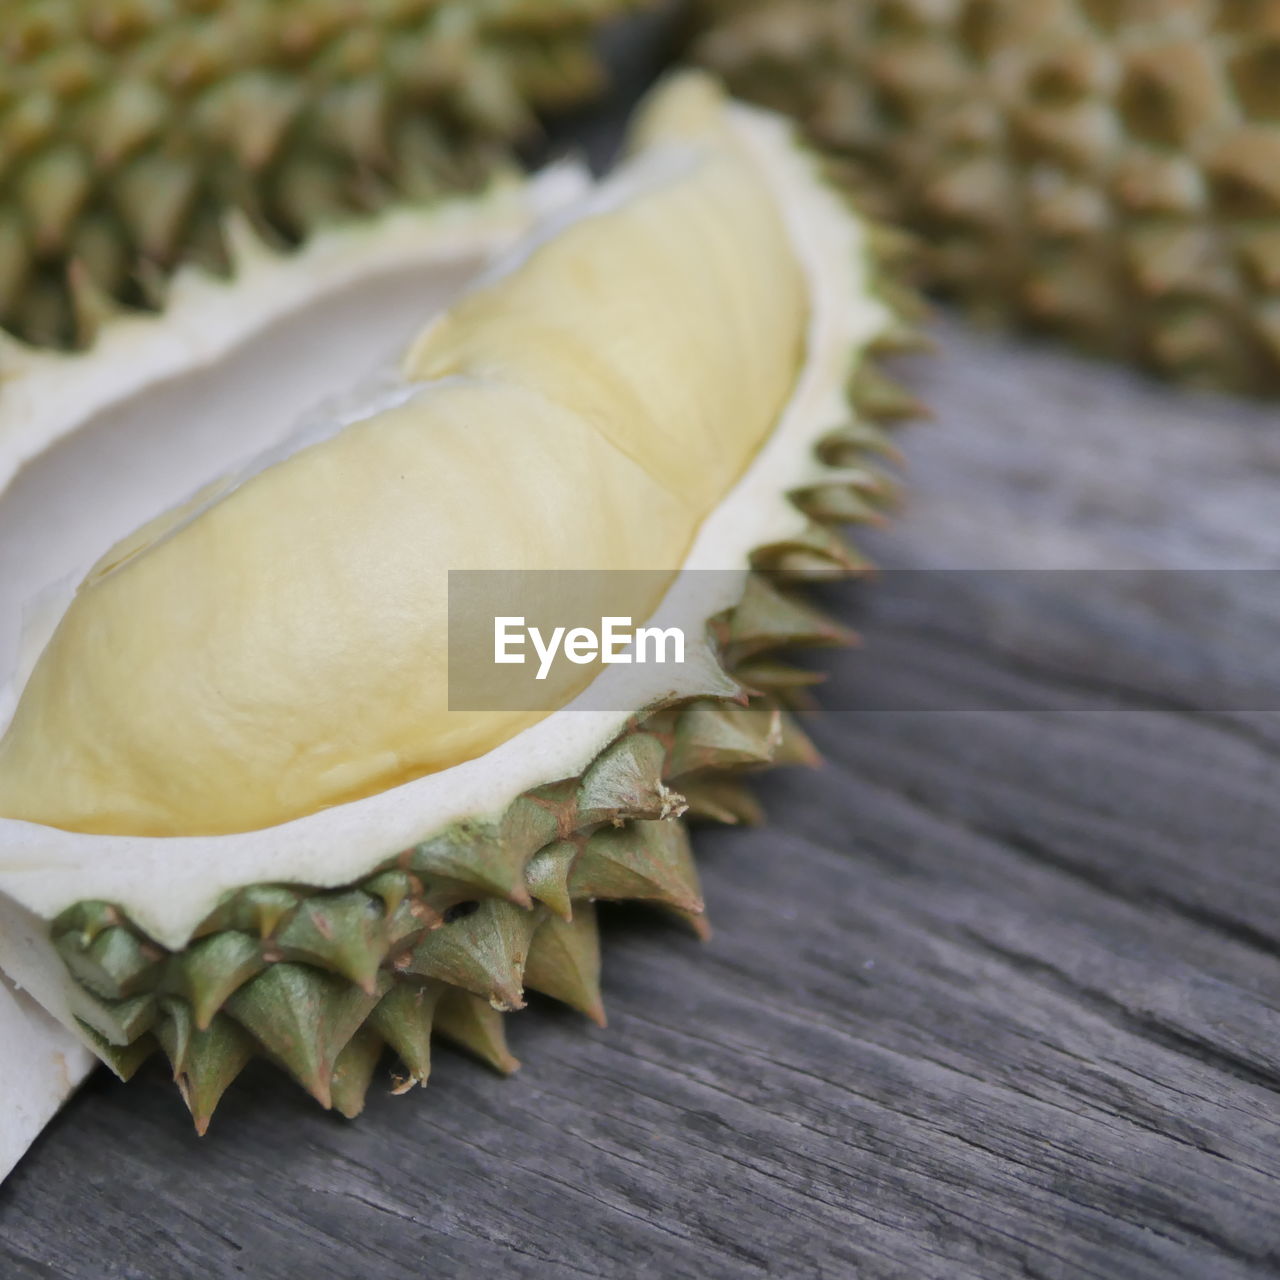 food and drink, food, plant, produce, freshness, healthy eating, durian, wellbeing, no people, thistle, wood, fruit, close-up, vegetable, indoors, pineapple, tropical fruit, raw food, still life, organic, studio shot, table, green